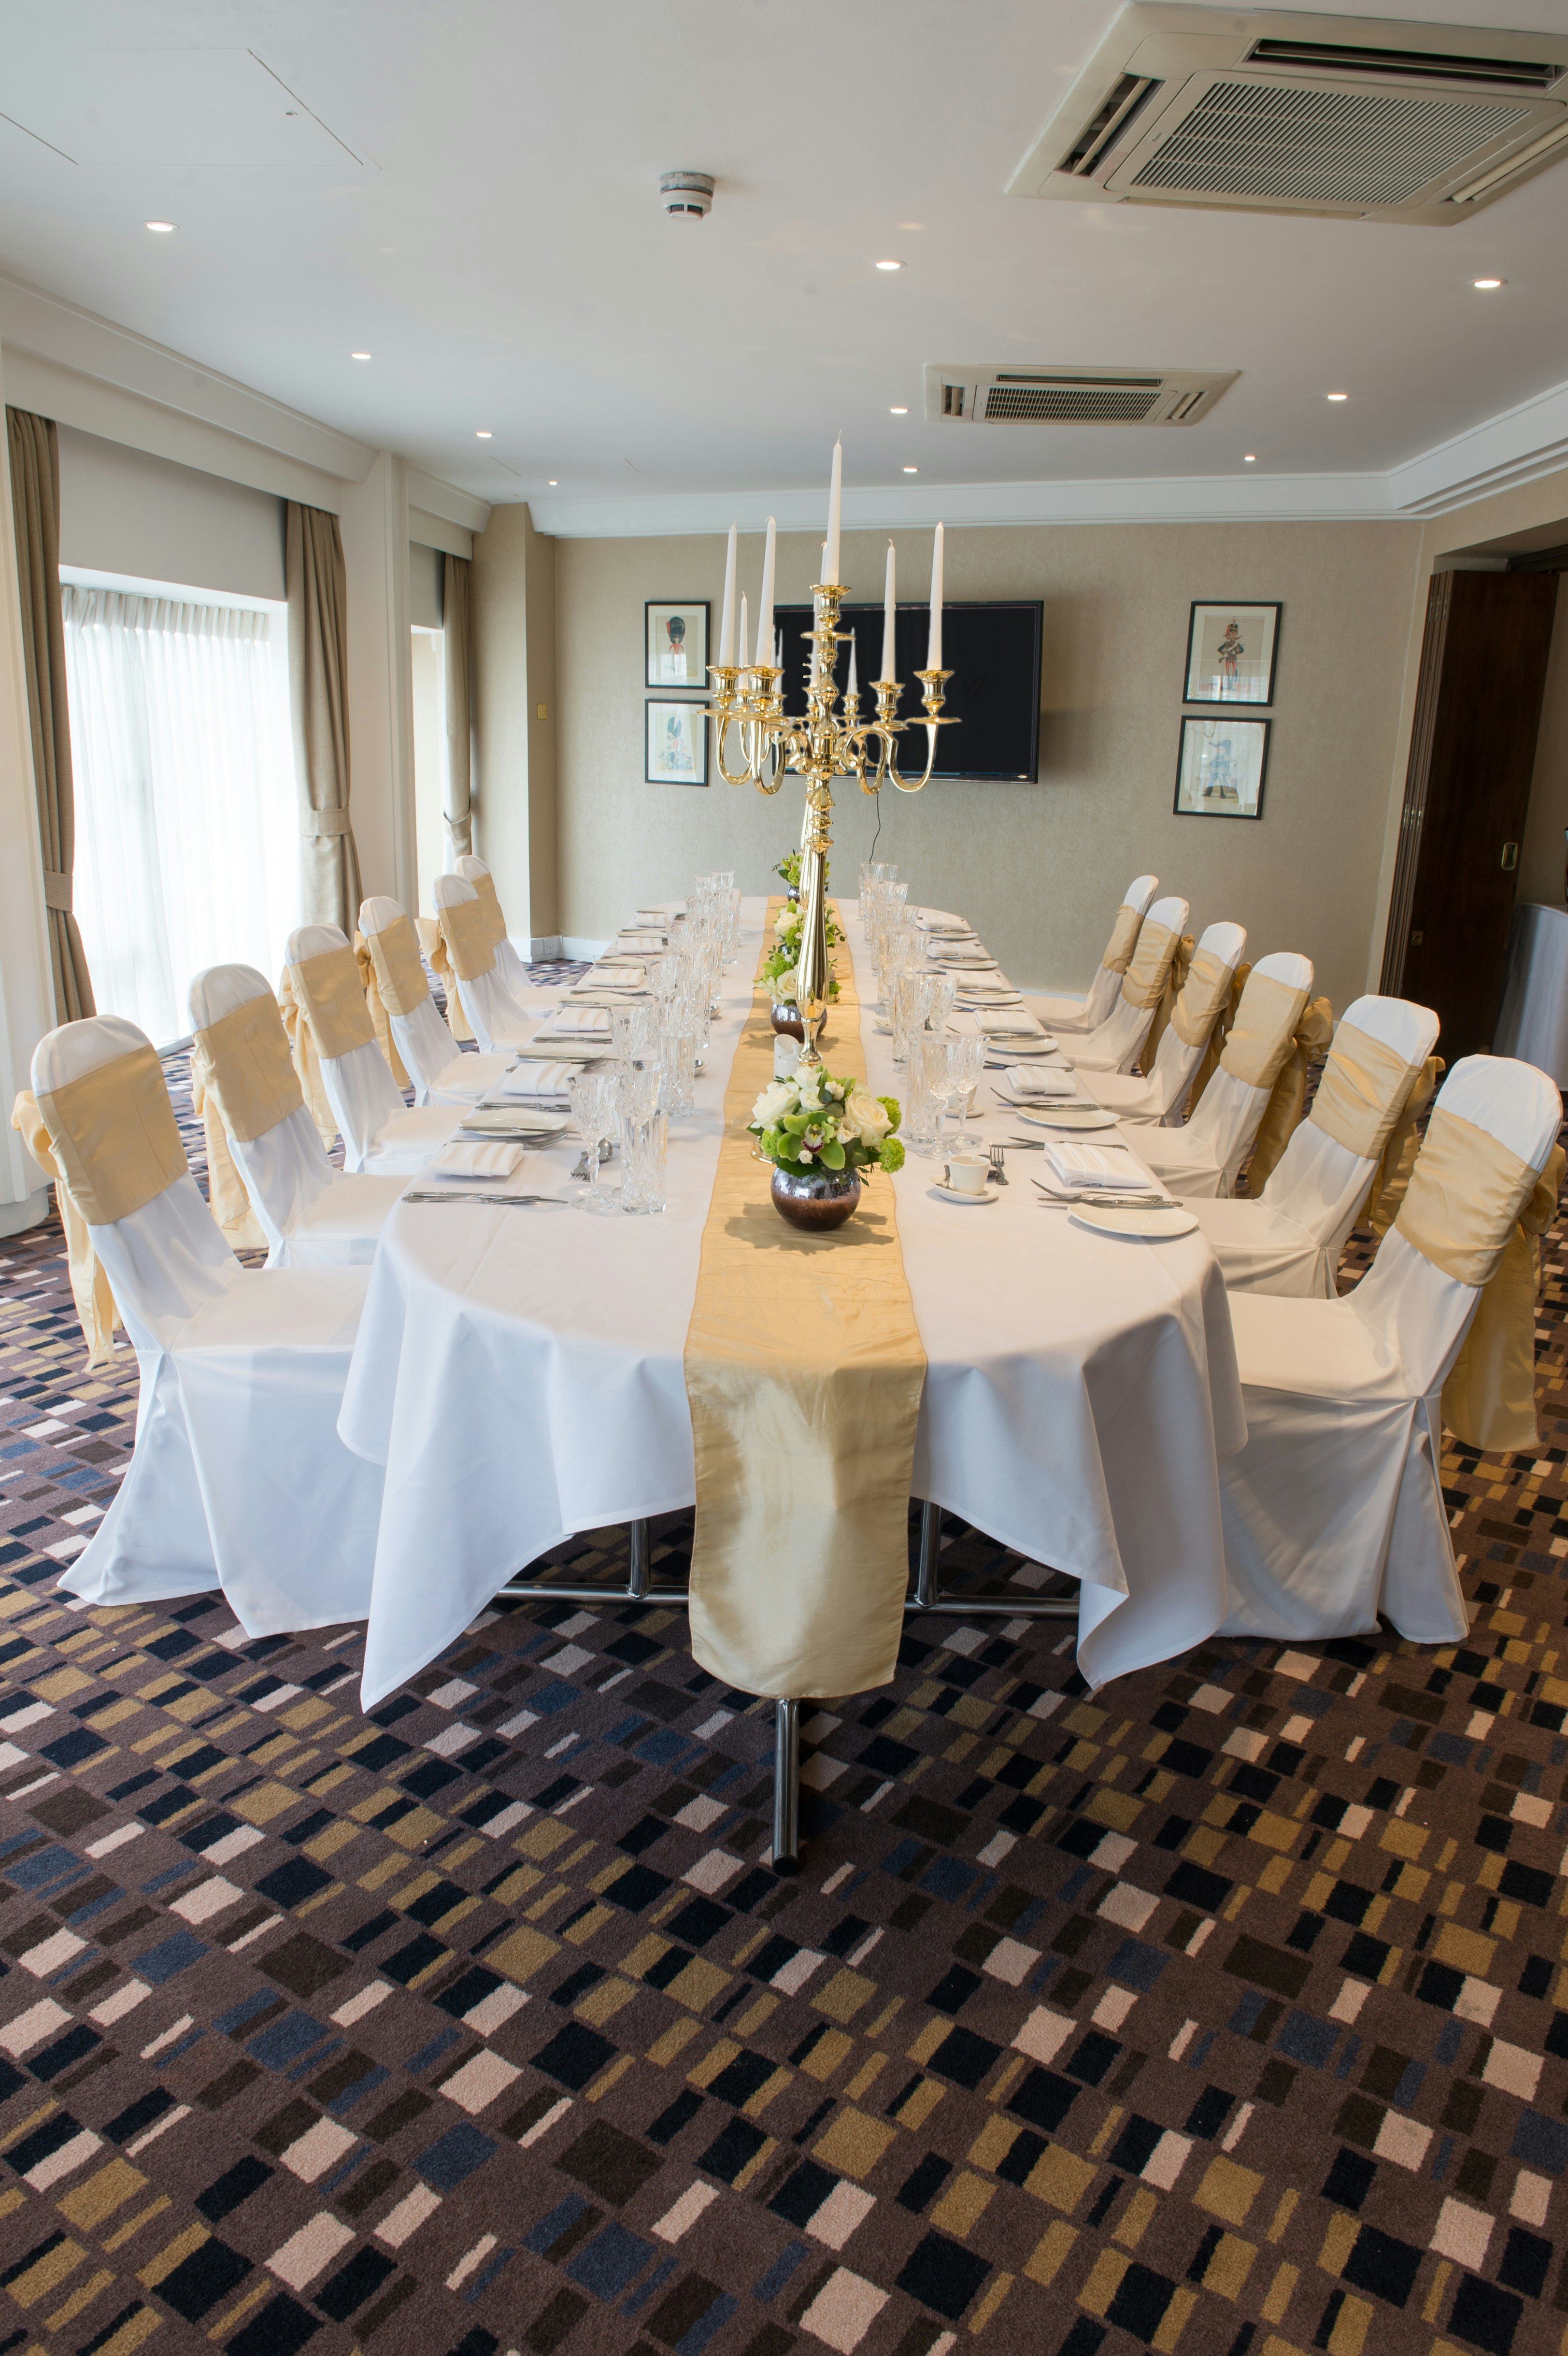 Victory Services Club - Allenby Room & Plumer image 3